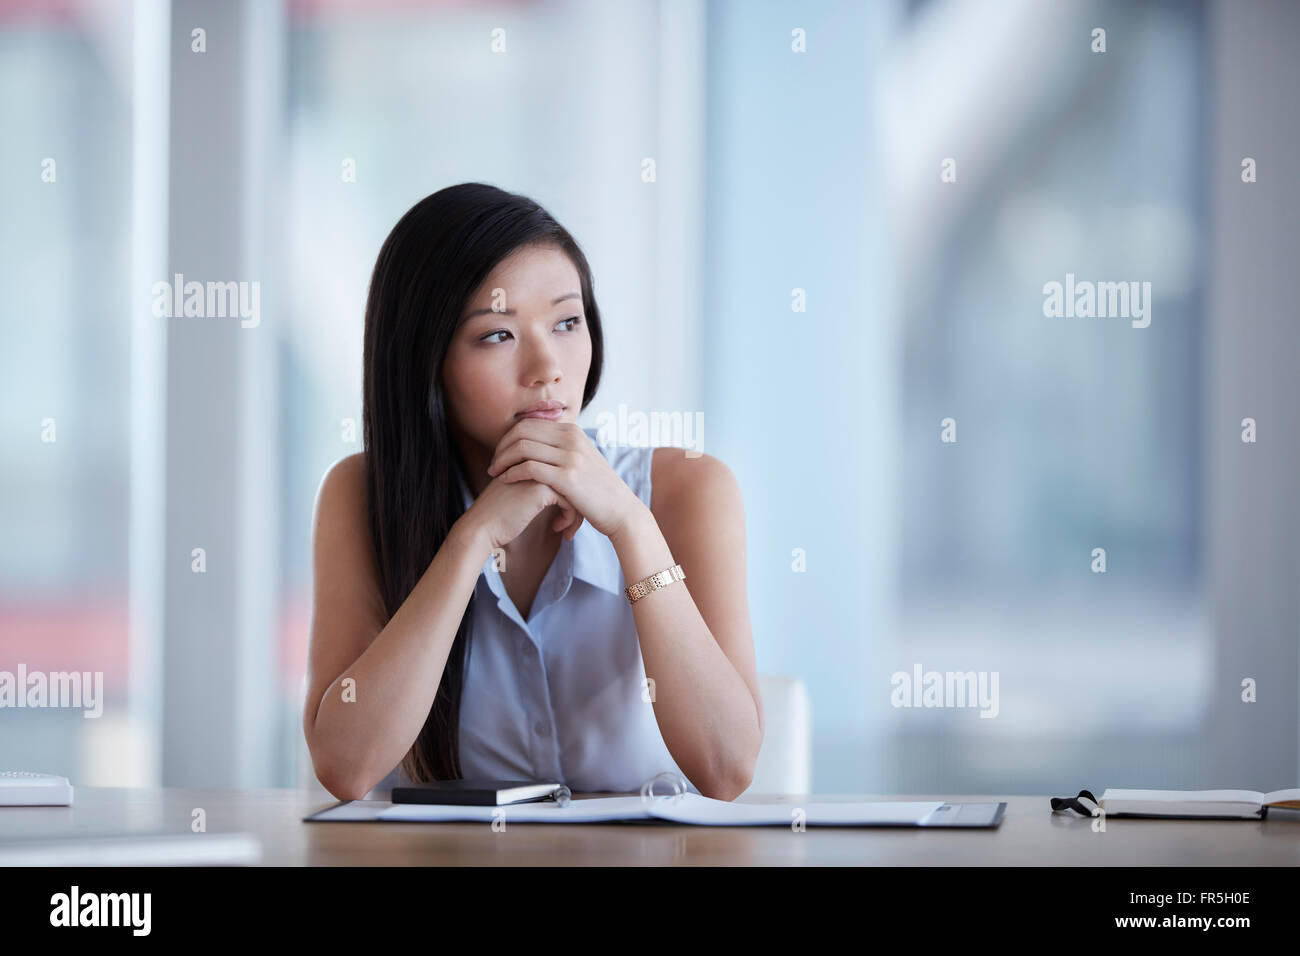 Pensive businesswoman looking away in conference room Banque D'Images